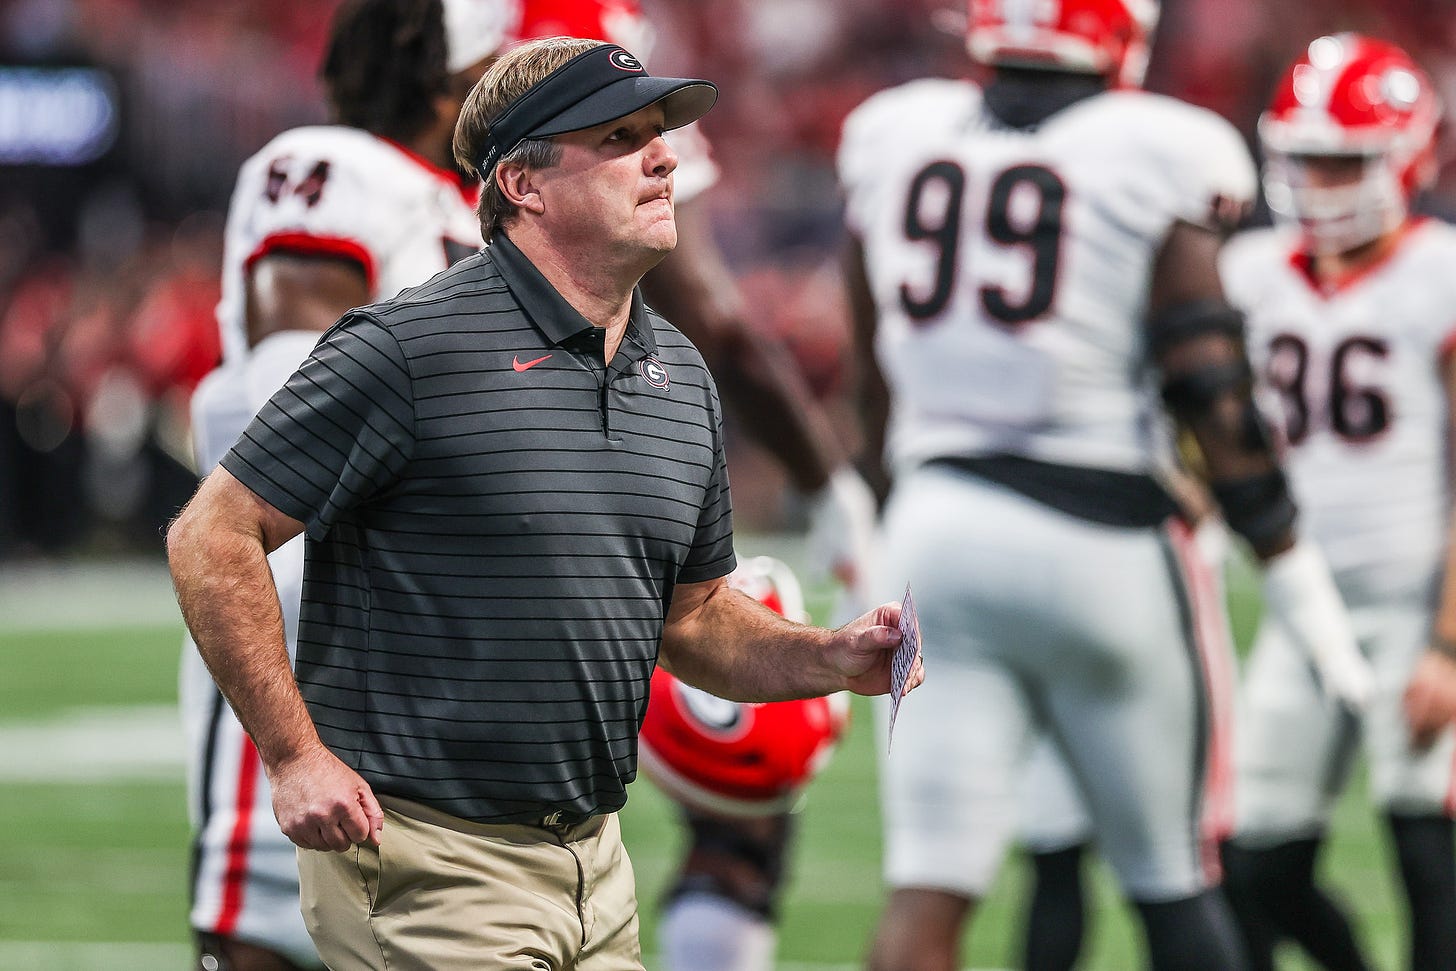 Georgia head coach Kirby Smart during a game against Alabama in the 2021 SEC Championship at Mercedes-Benz Stadium in Atlanta, Ga., on Saturday, Dec. 4, 2021. (Photo by Mackenzie Miles)